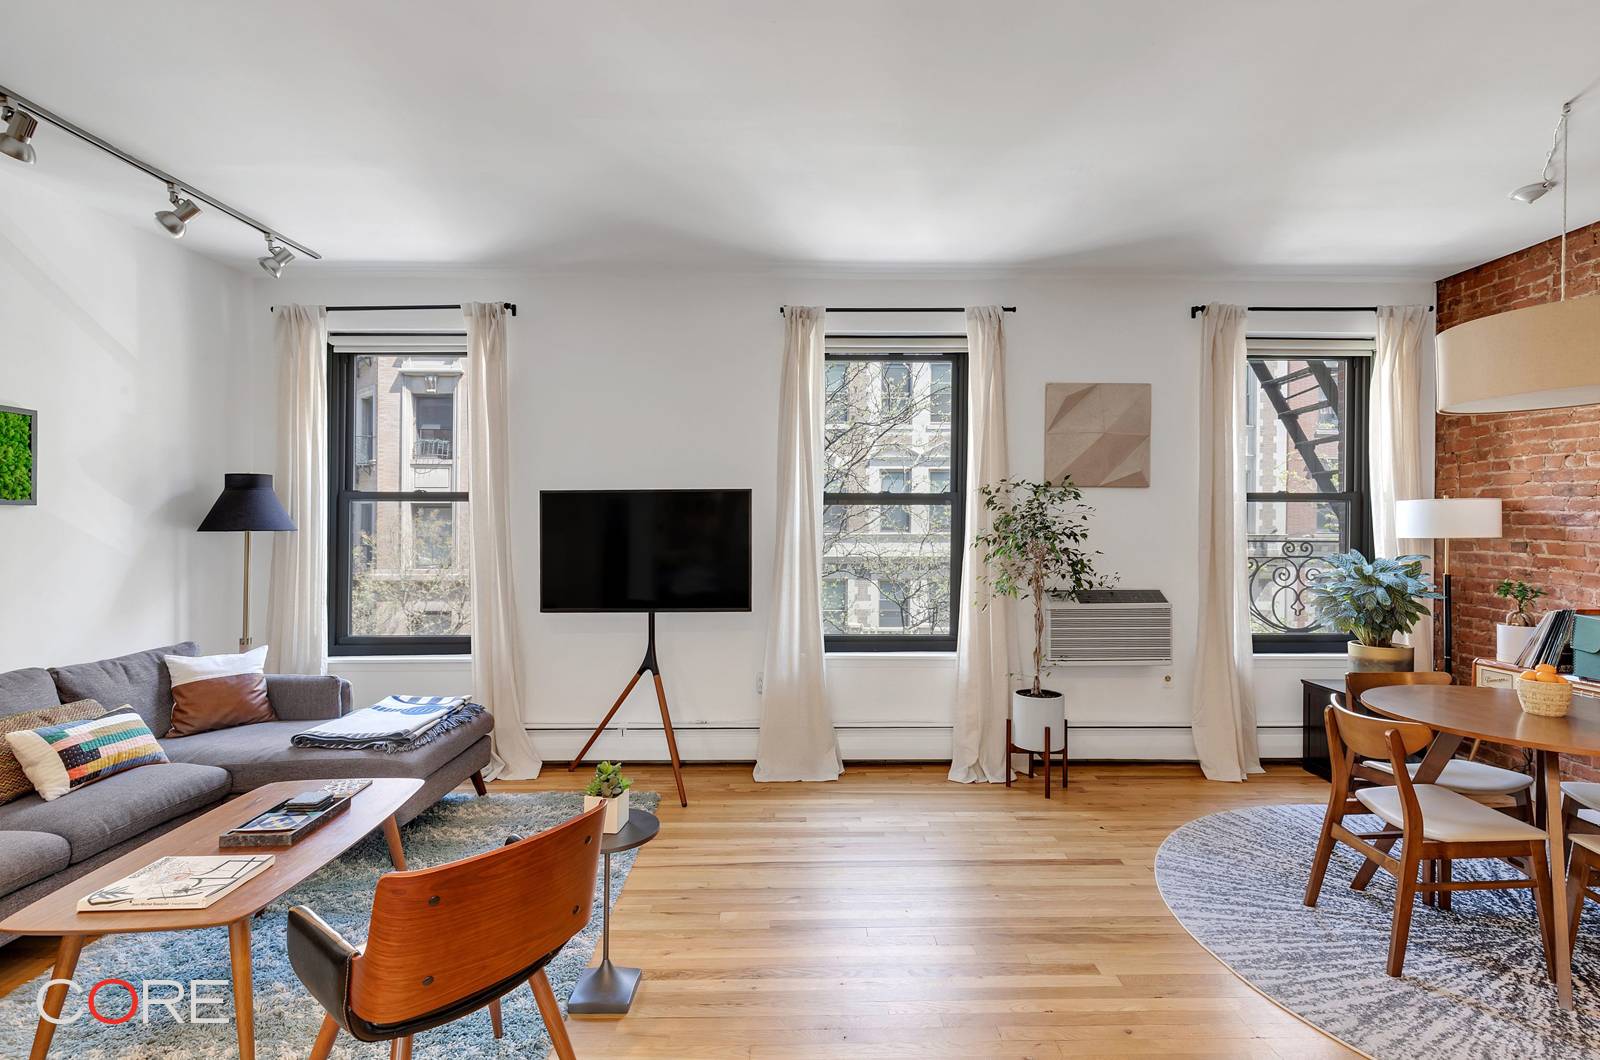 Charm and character abound in this chic and spacious, renovated one bedroom beauty just off Riverside Park.